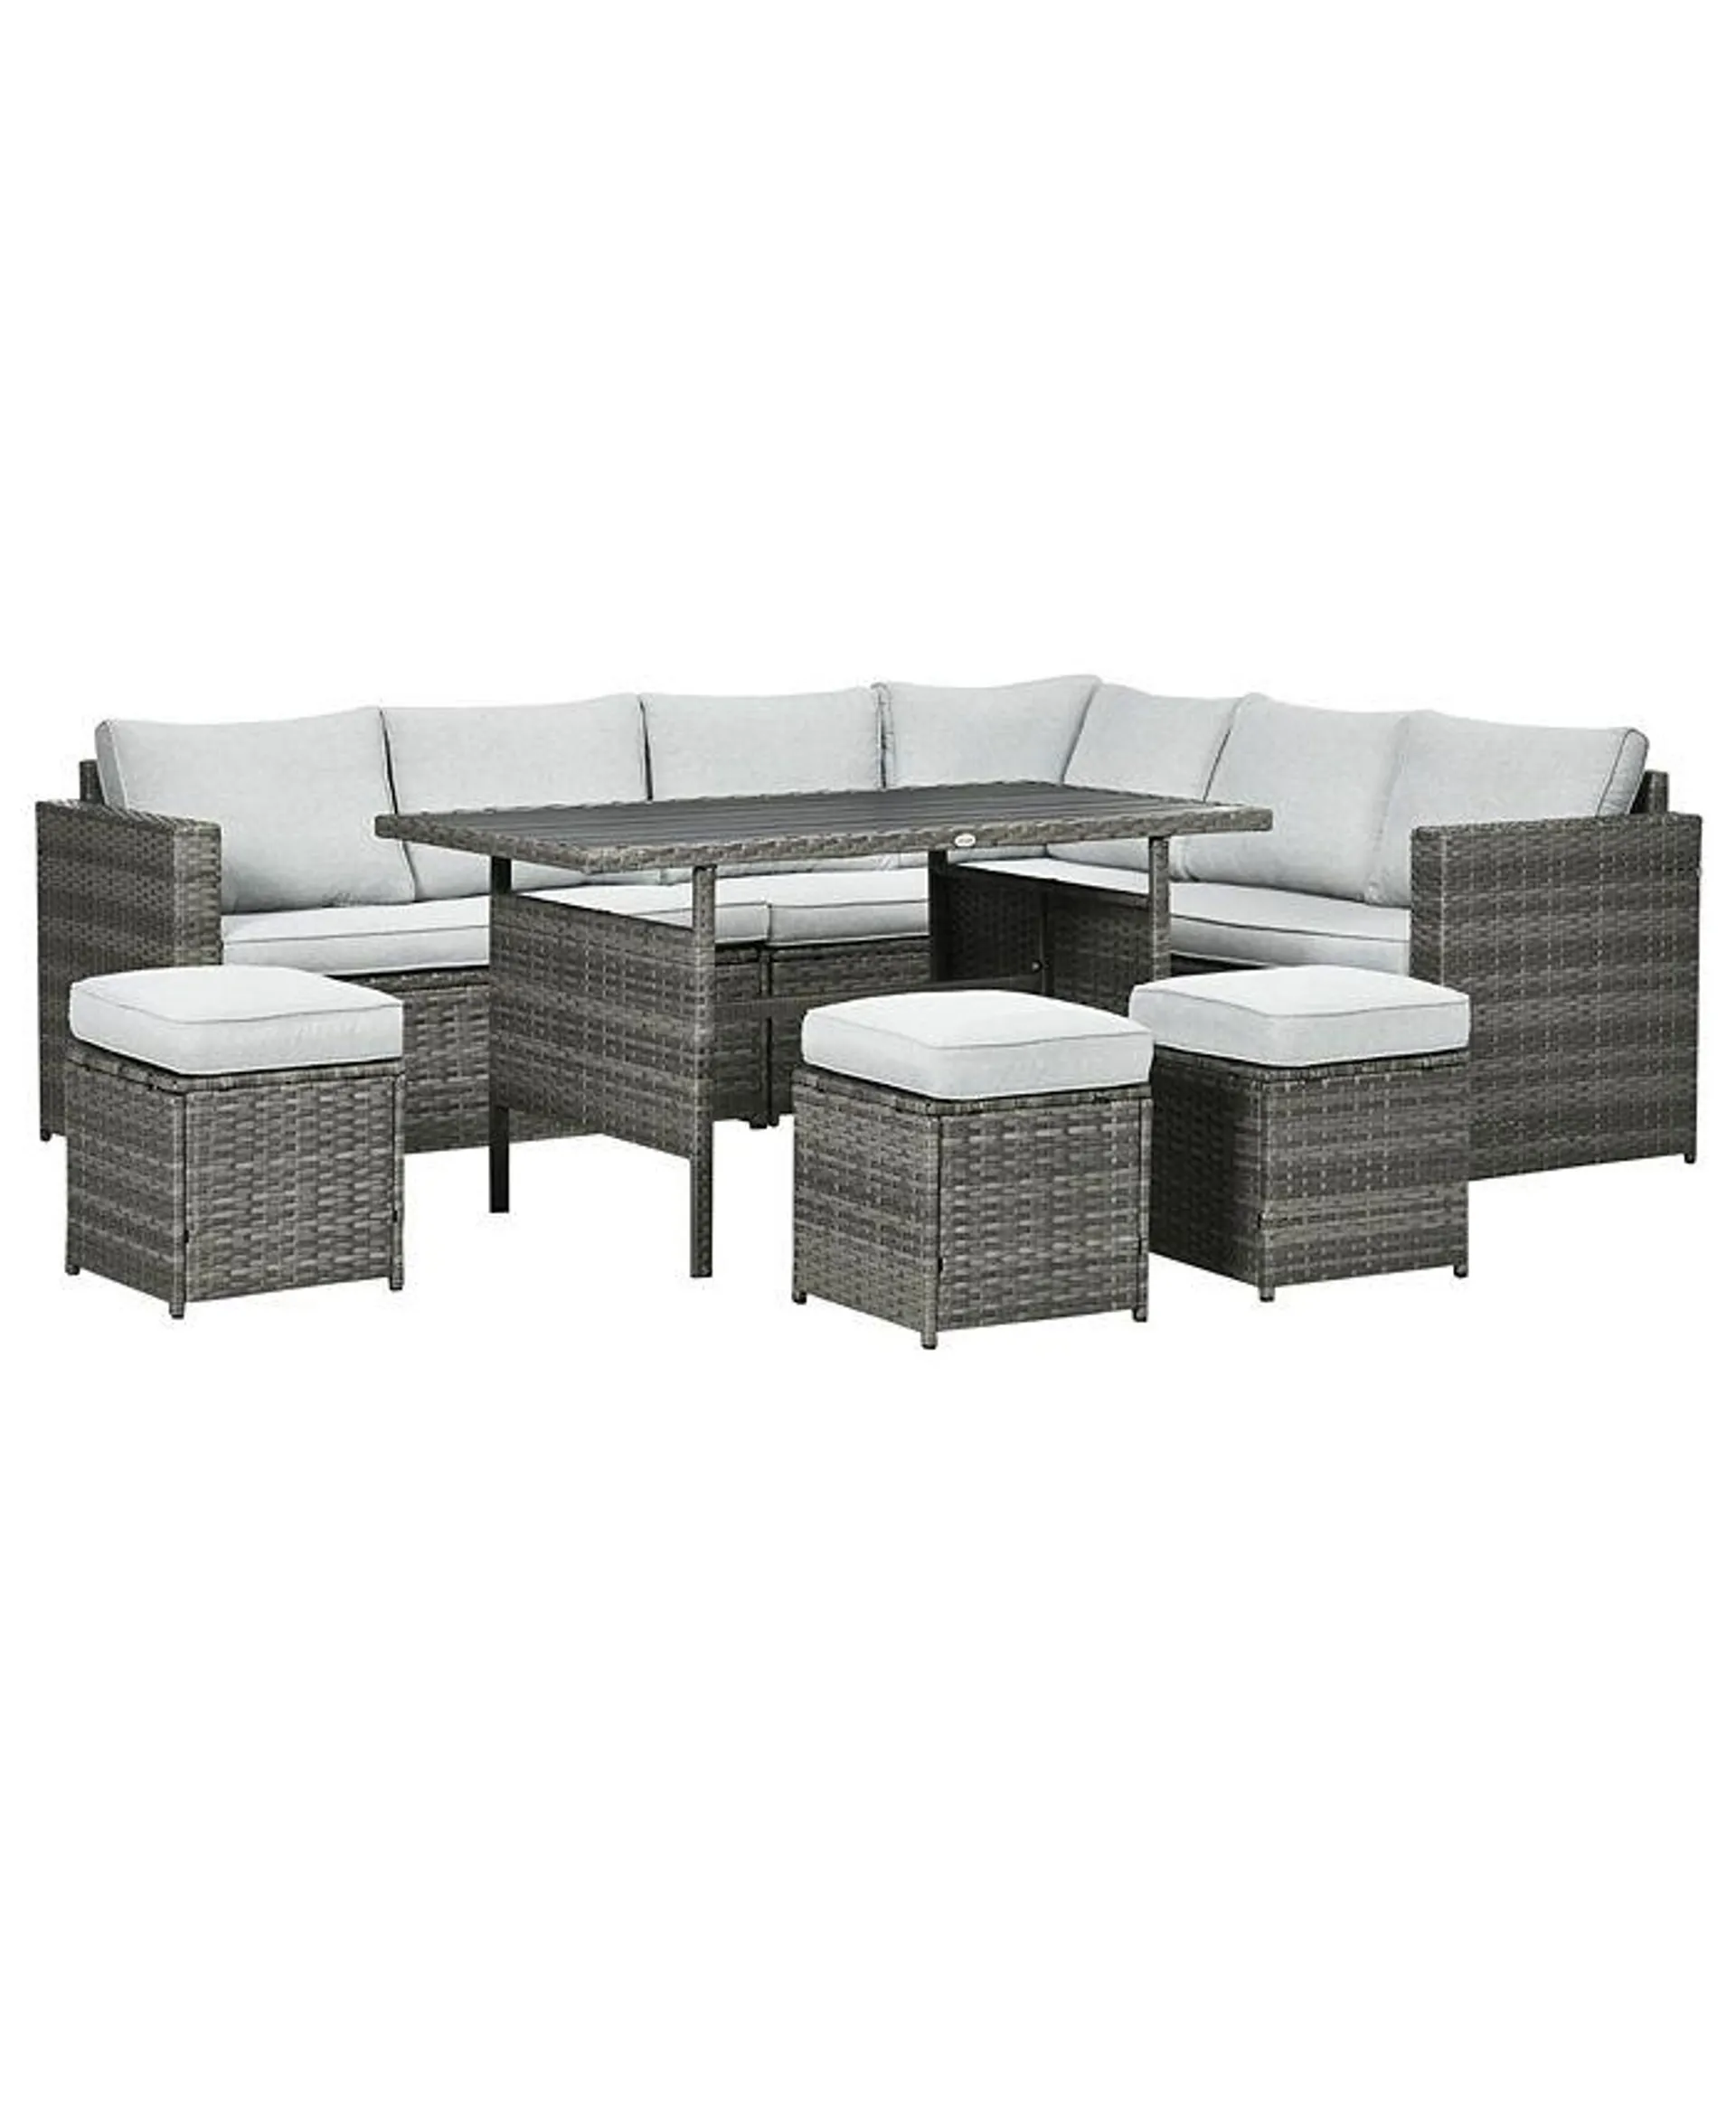 7 Piece Patio Furniture Set, Outdoor L-Shaped Sectional Sofa with 3 Loveseats, 3 Ottoman Chairs, Outside Conversation Set with Dining Table, Cushions, Storage, Mixed Gray